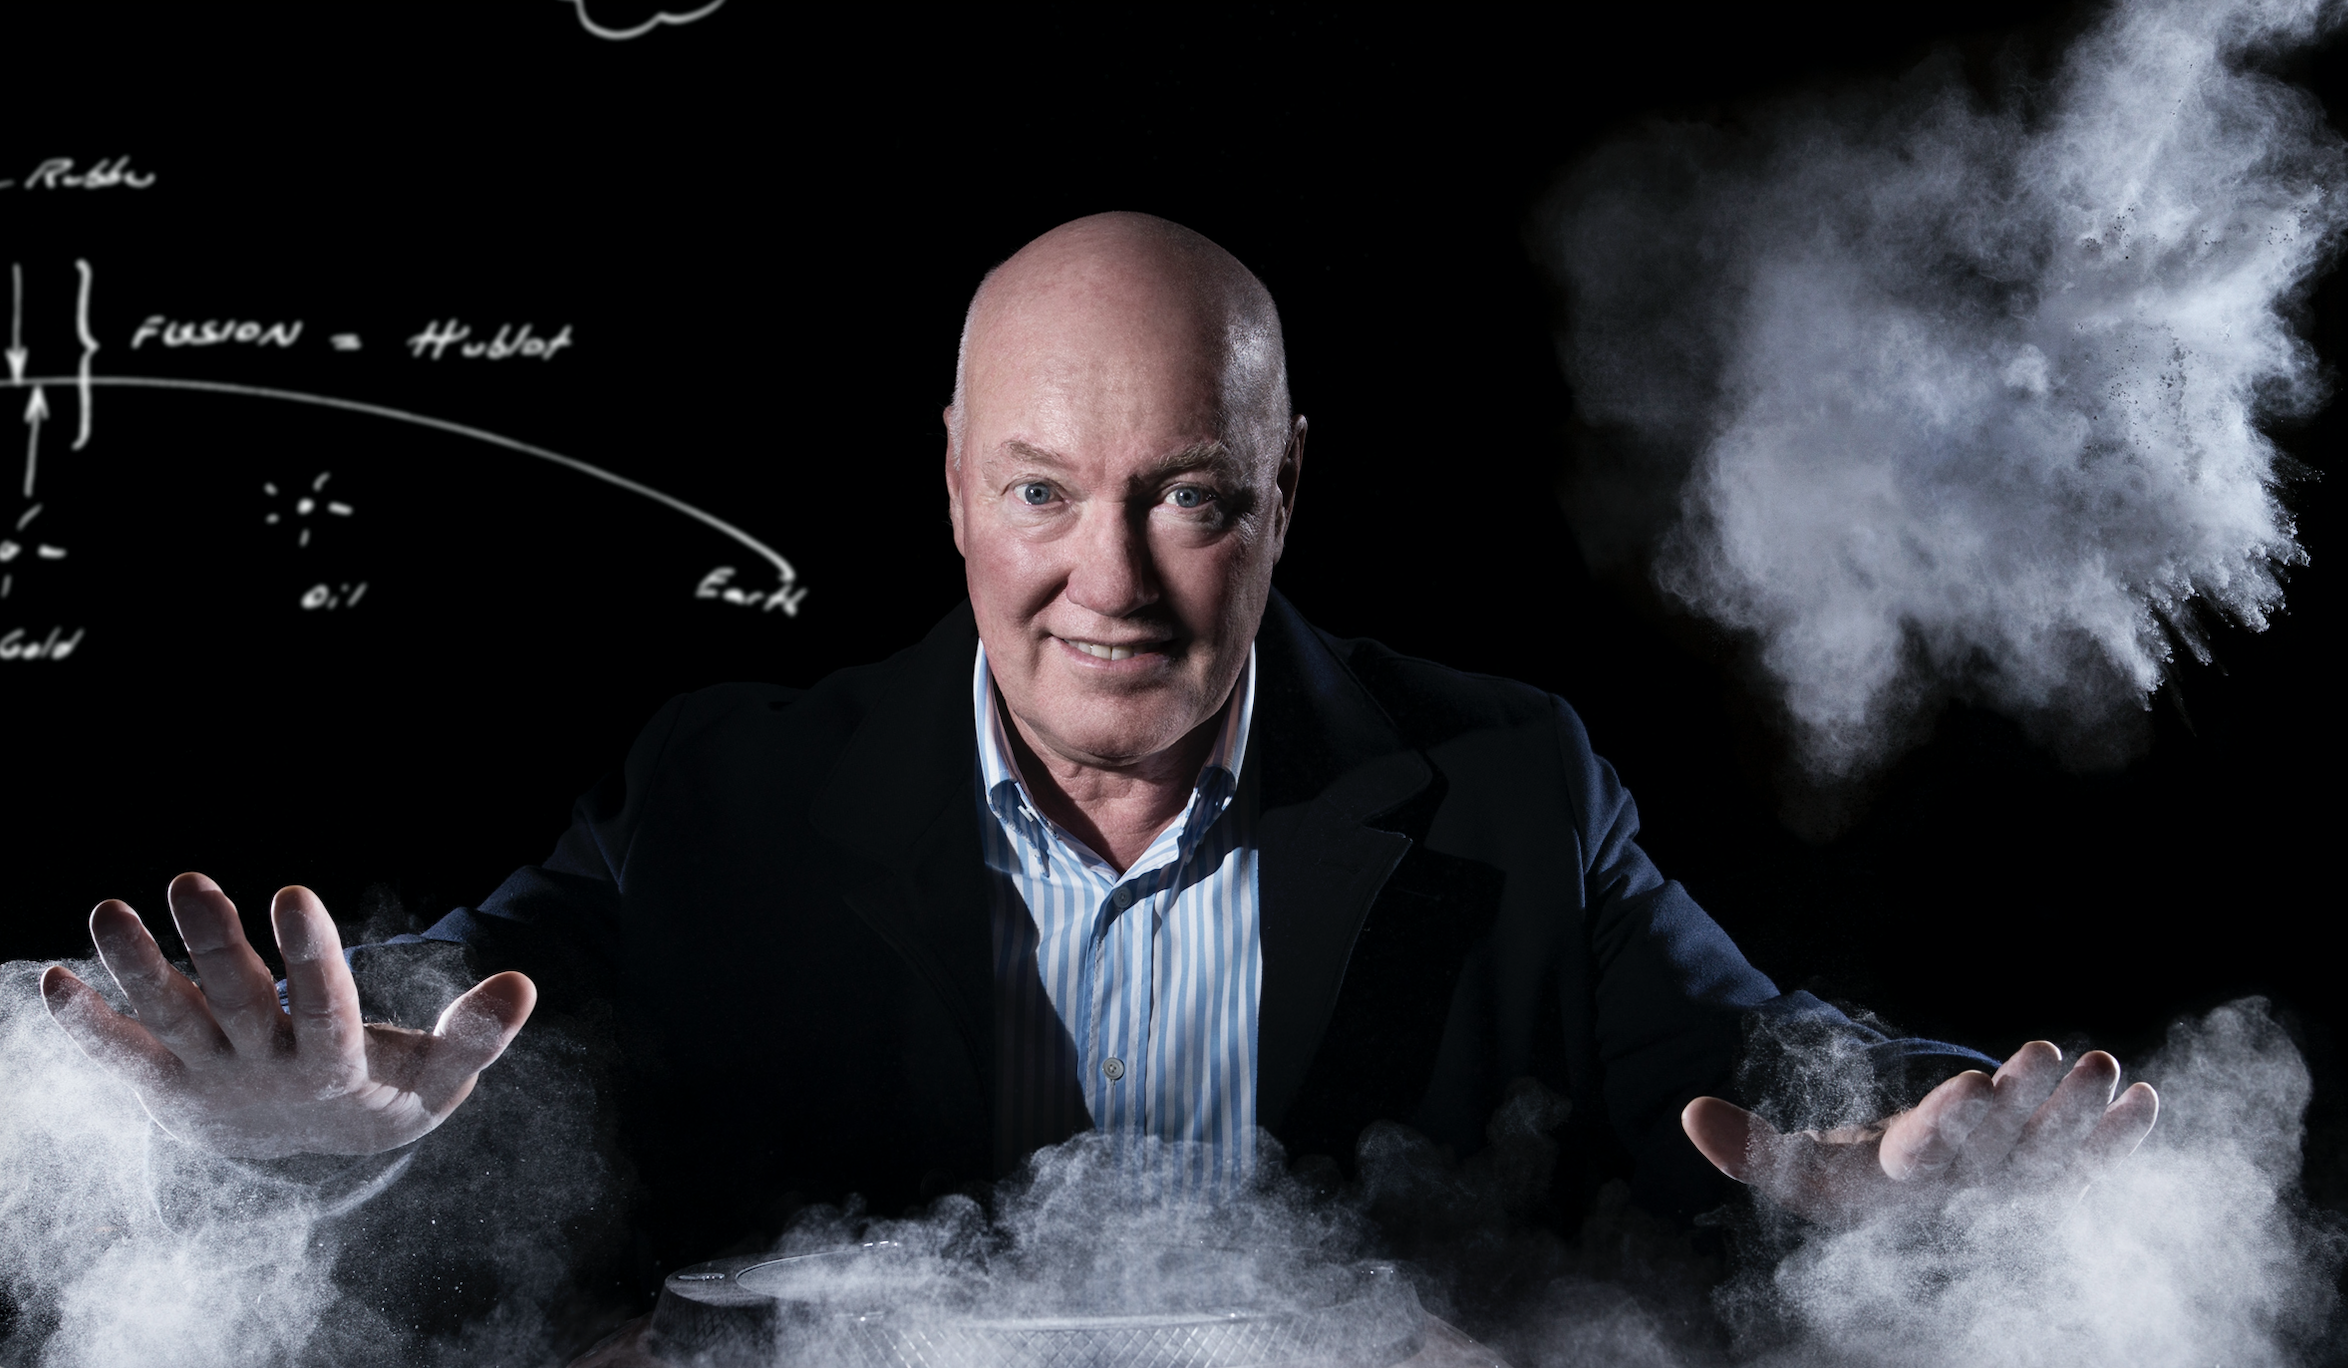 THE BIG INTERVIEW: Jean-Claude Biver on waiting lists, unicorn